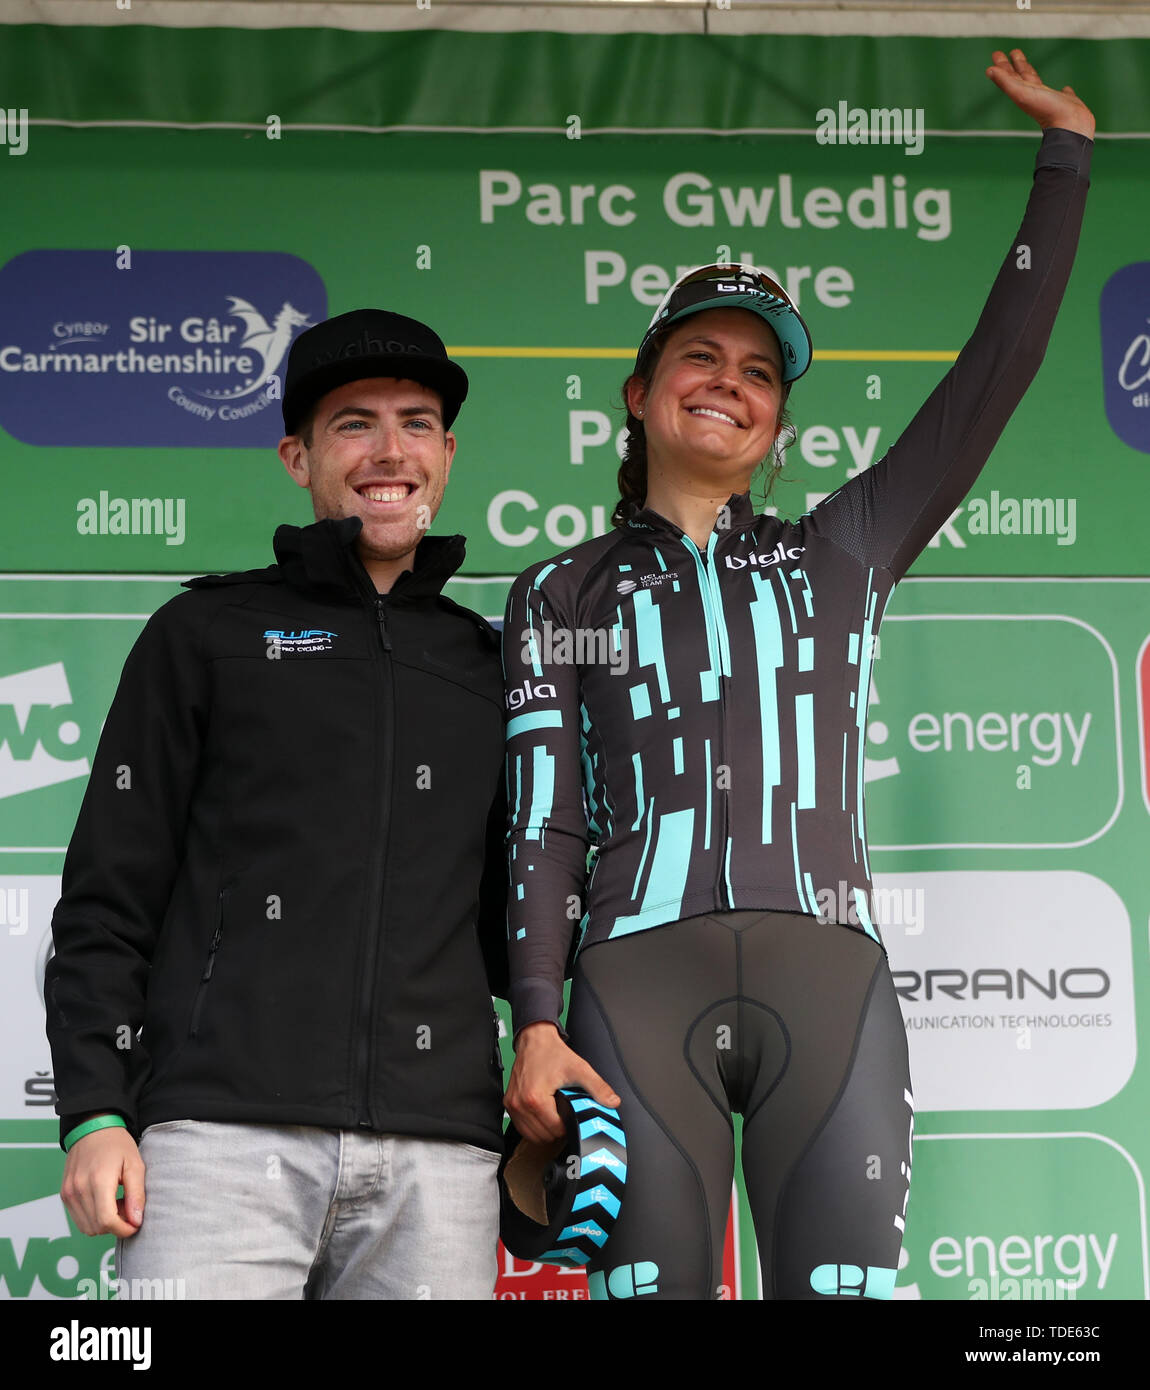 Wahooligan Combativity Award for most combative rider after stage six Bigla Pro Cycling's Leah Thomas during stage six of the OVO Energy Women's Tour. Stock Photo